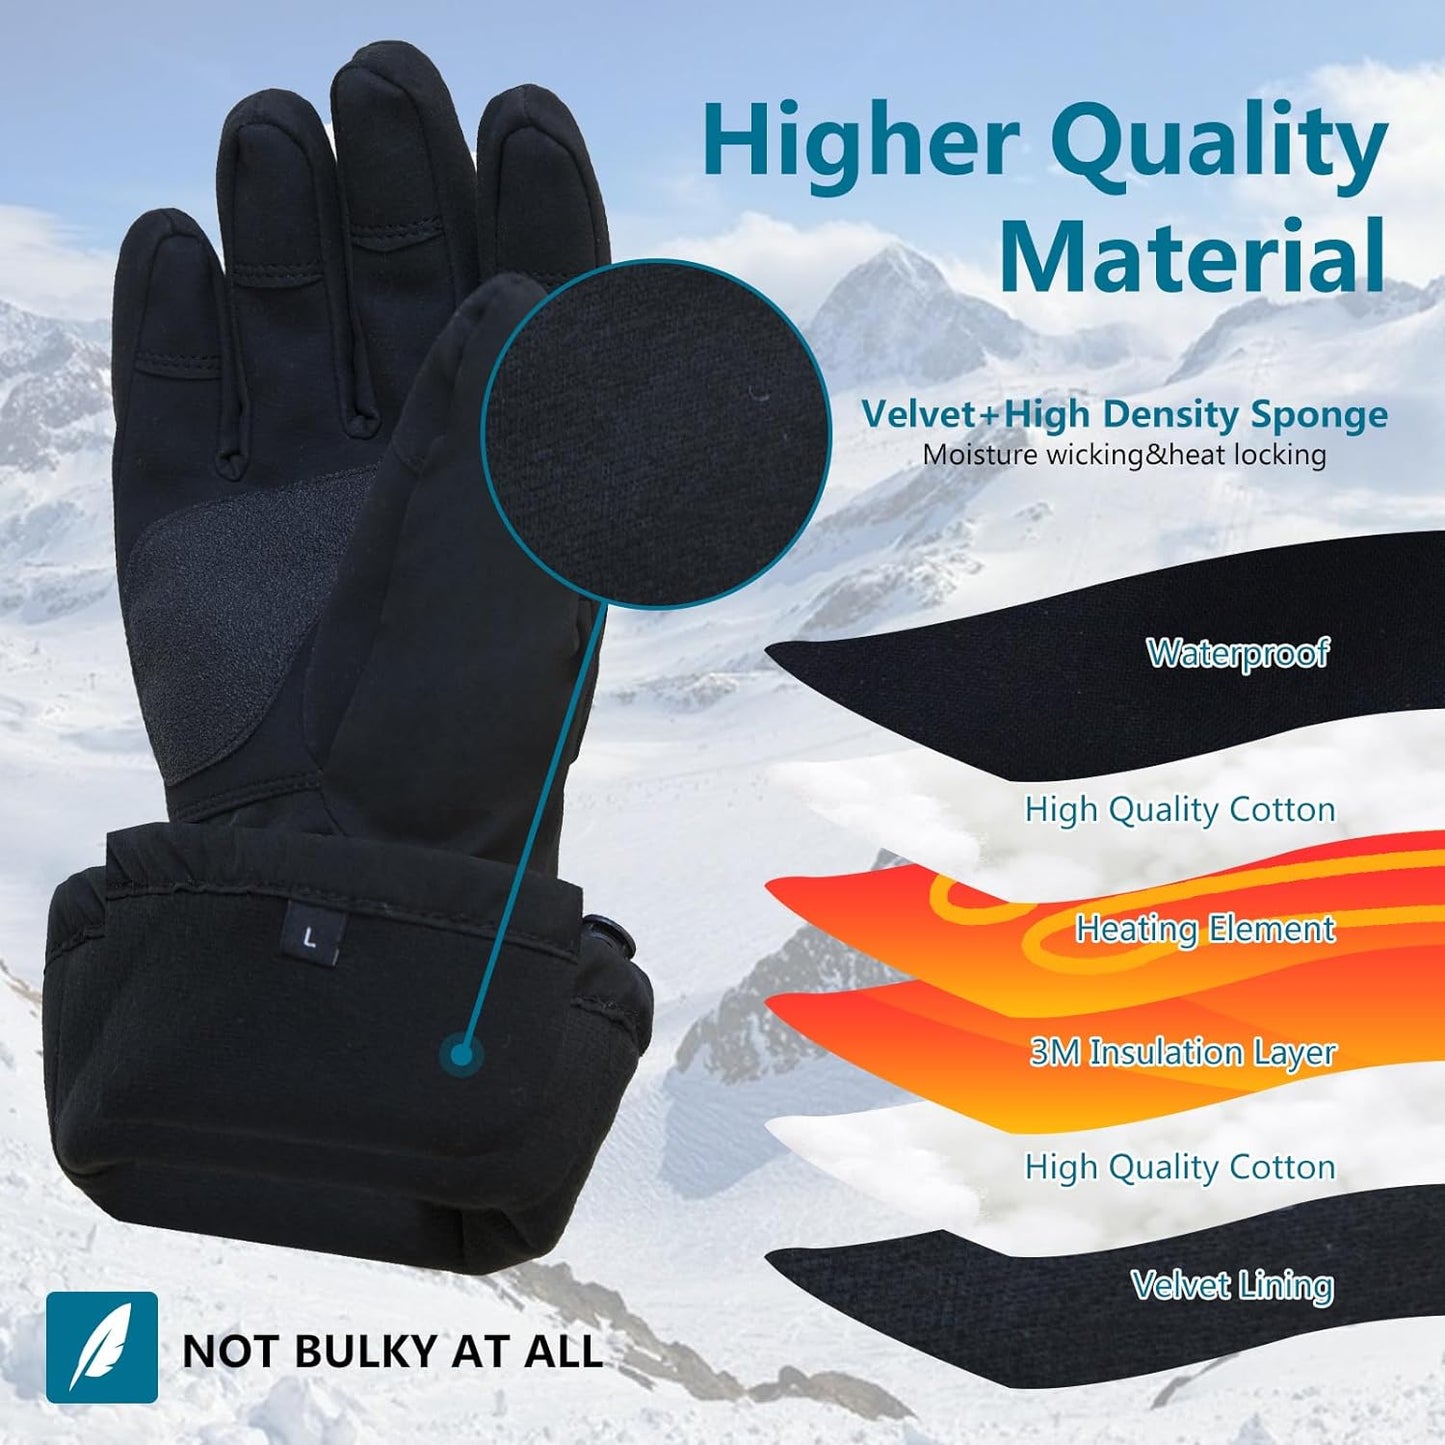 Heated Gloves for Men Women Teens, Rechargeable 5000mAh Battery Powered Heated Work Gloves, Waterproof Touchscreen Electric Hand Warmer for Outdoor Sports Cycling Skiing Motorcycling Hunting (S,M,L)